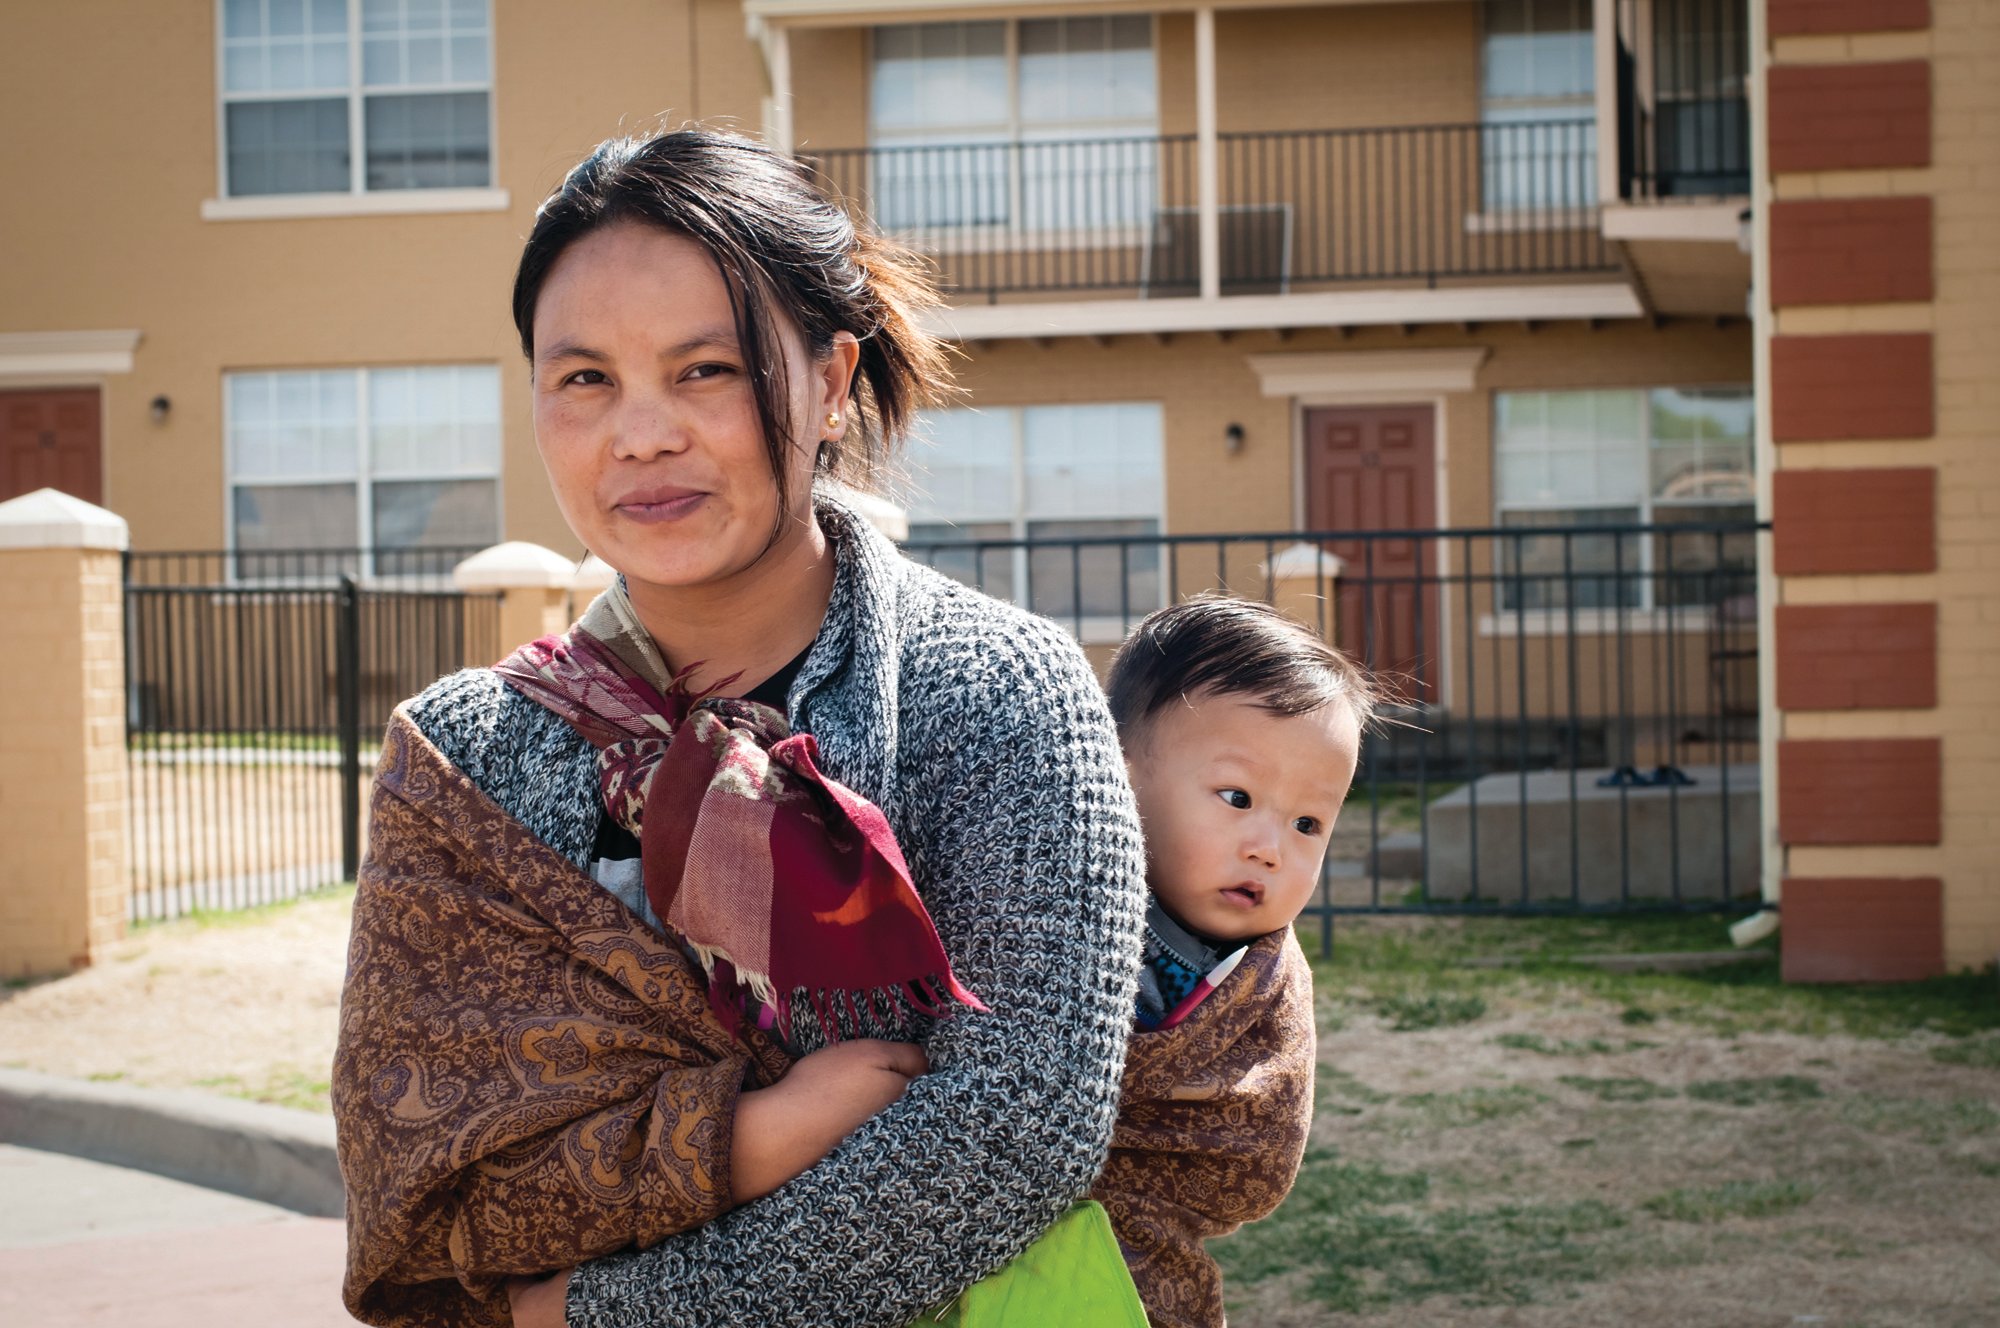 Par Meng and her toddler, Peter Lien, are Burmese refugees who've lived in Amarillo for two years. Local leaders and conservative activists have pressured resettlement groups to bring fewer refugees like them to the city.